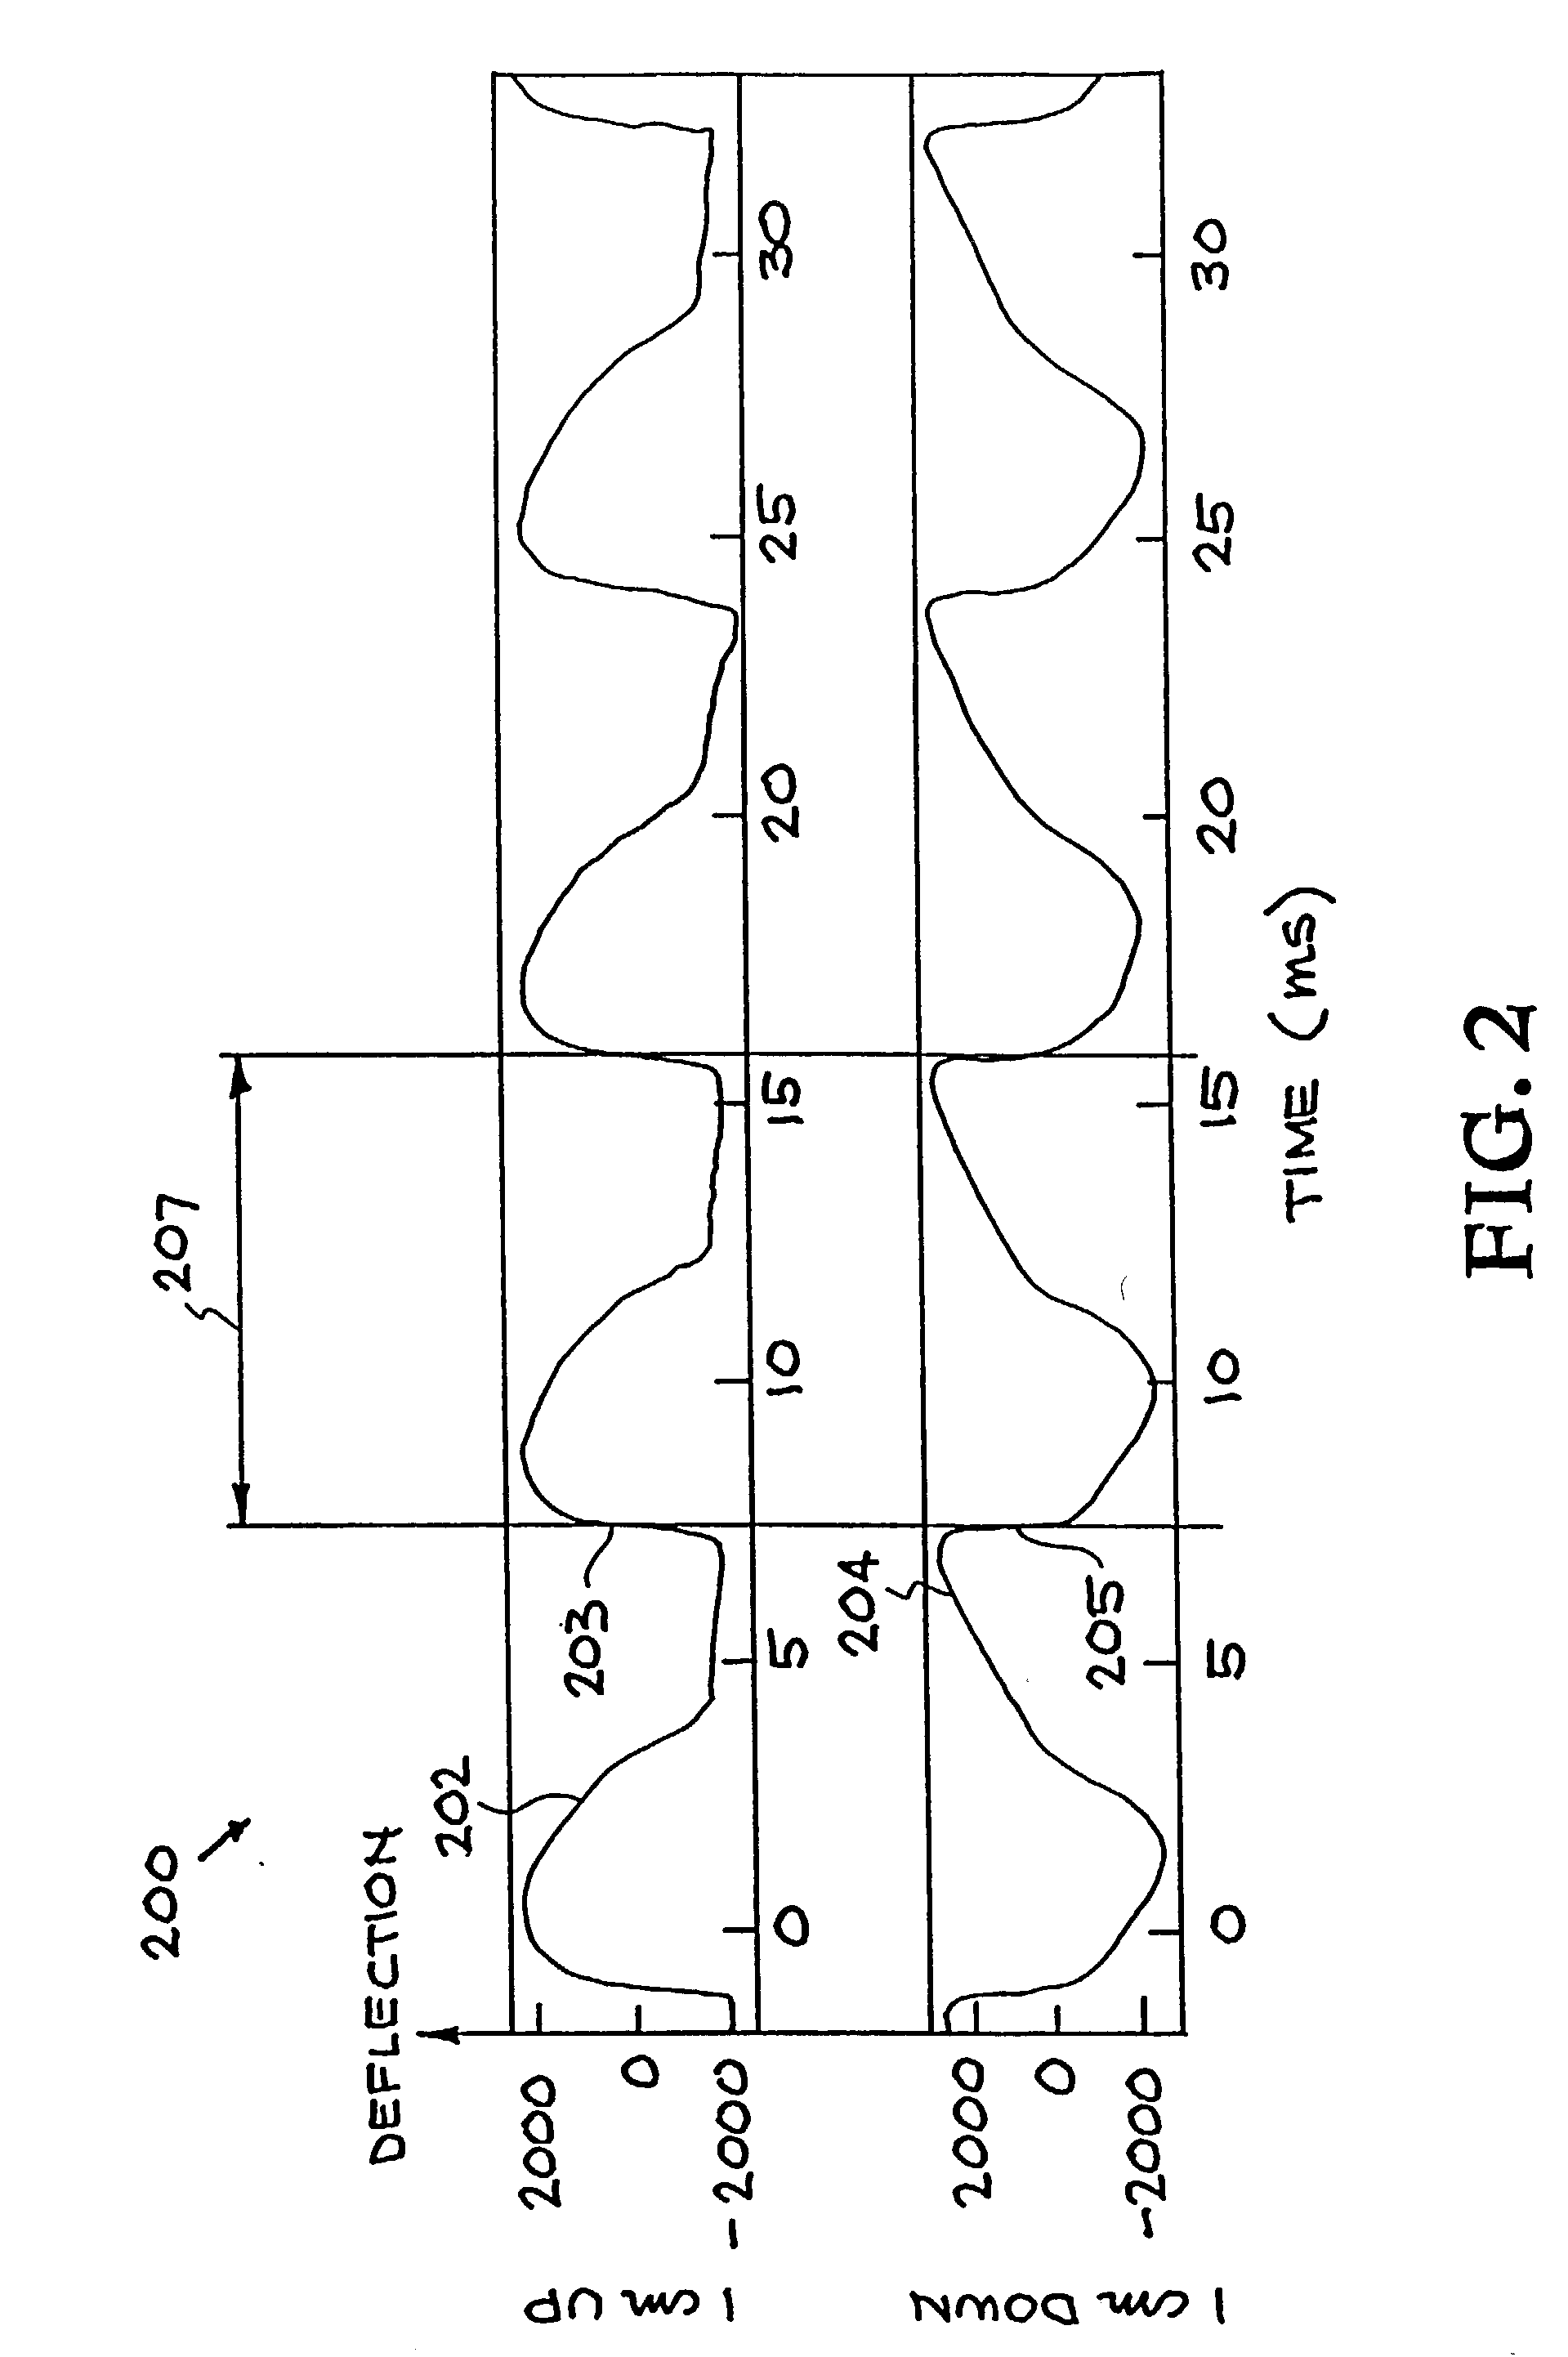 System and method for characterizing voiced excitations of speech and acoustic signals, removing acoustic noise from speech, and synthesizing speech